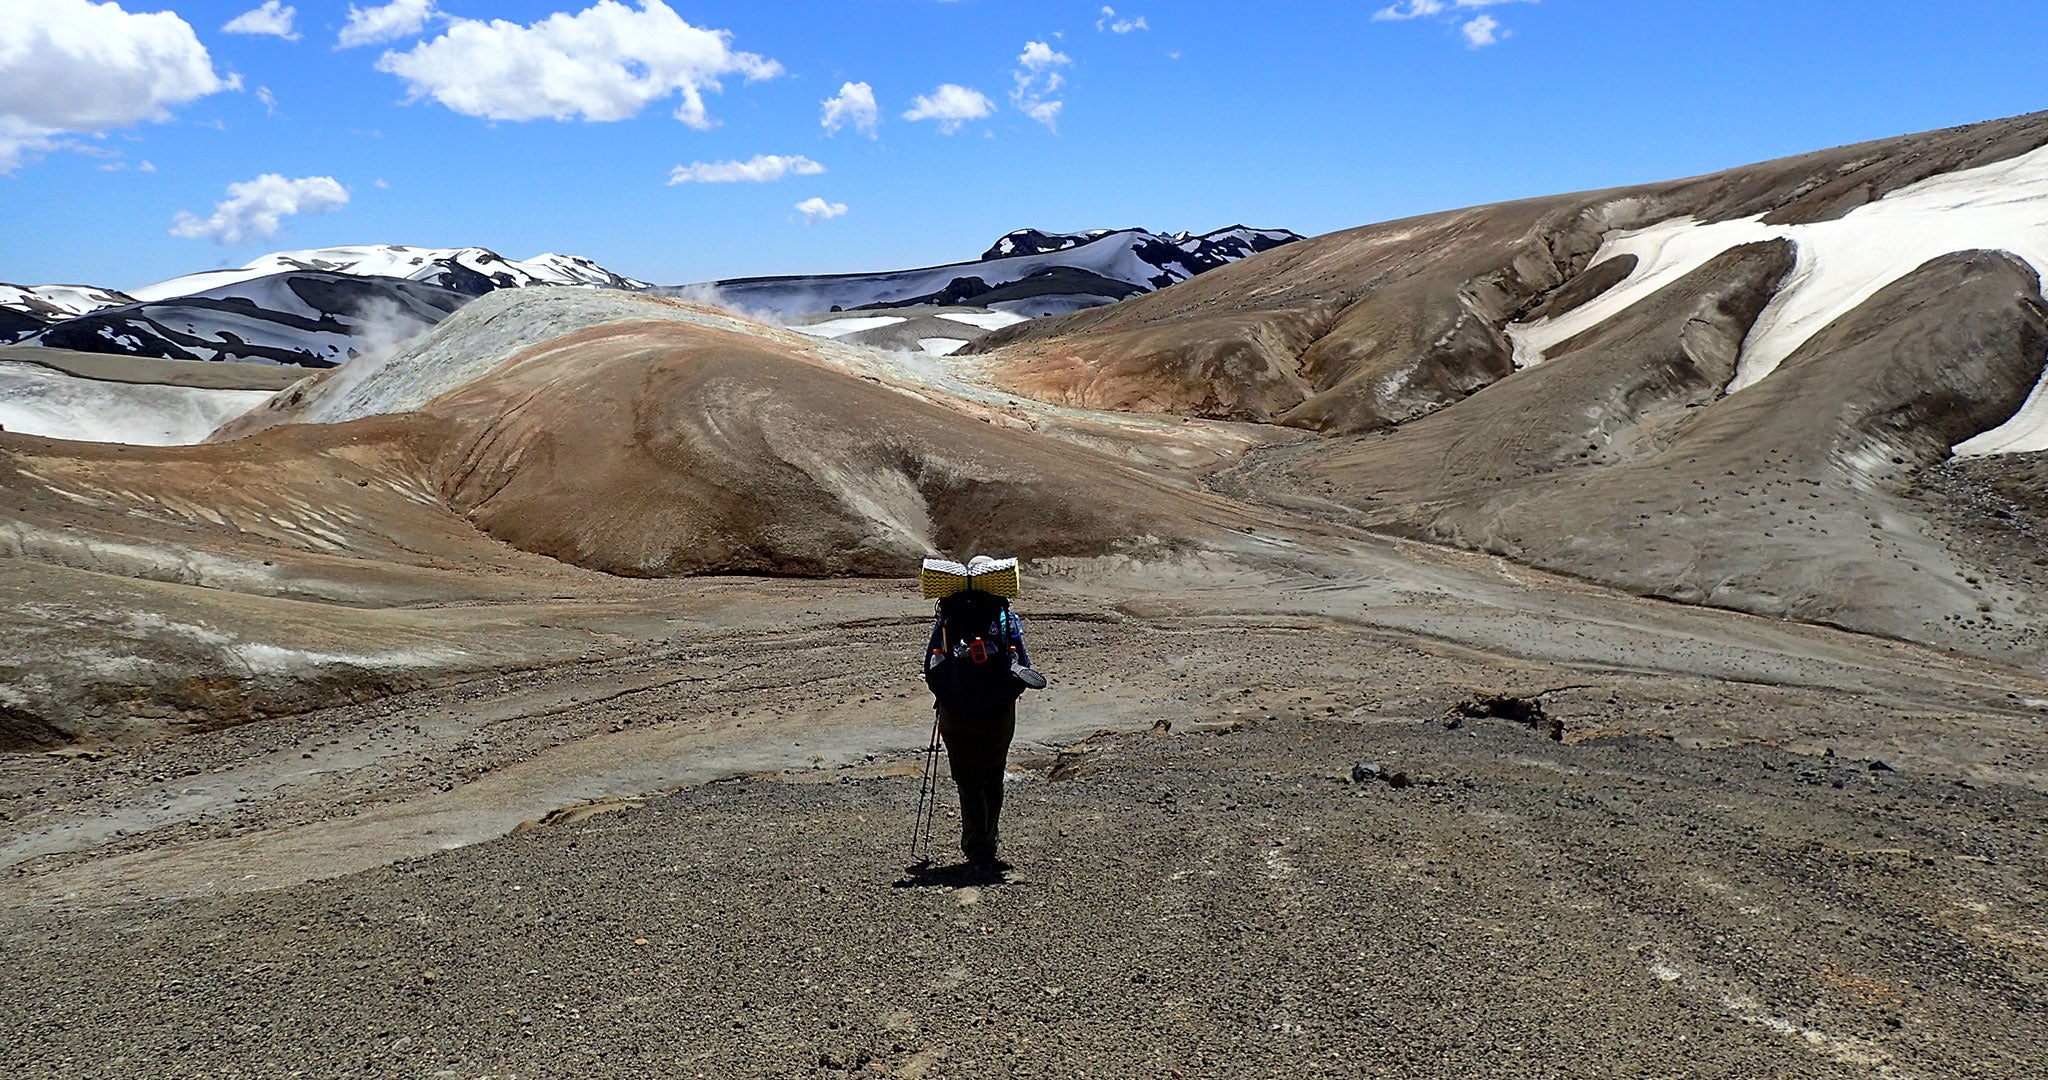 Ultralight backpacking through rock fields just north of the Central Chilean volcanoes.